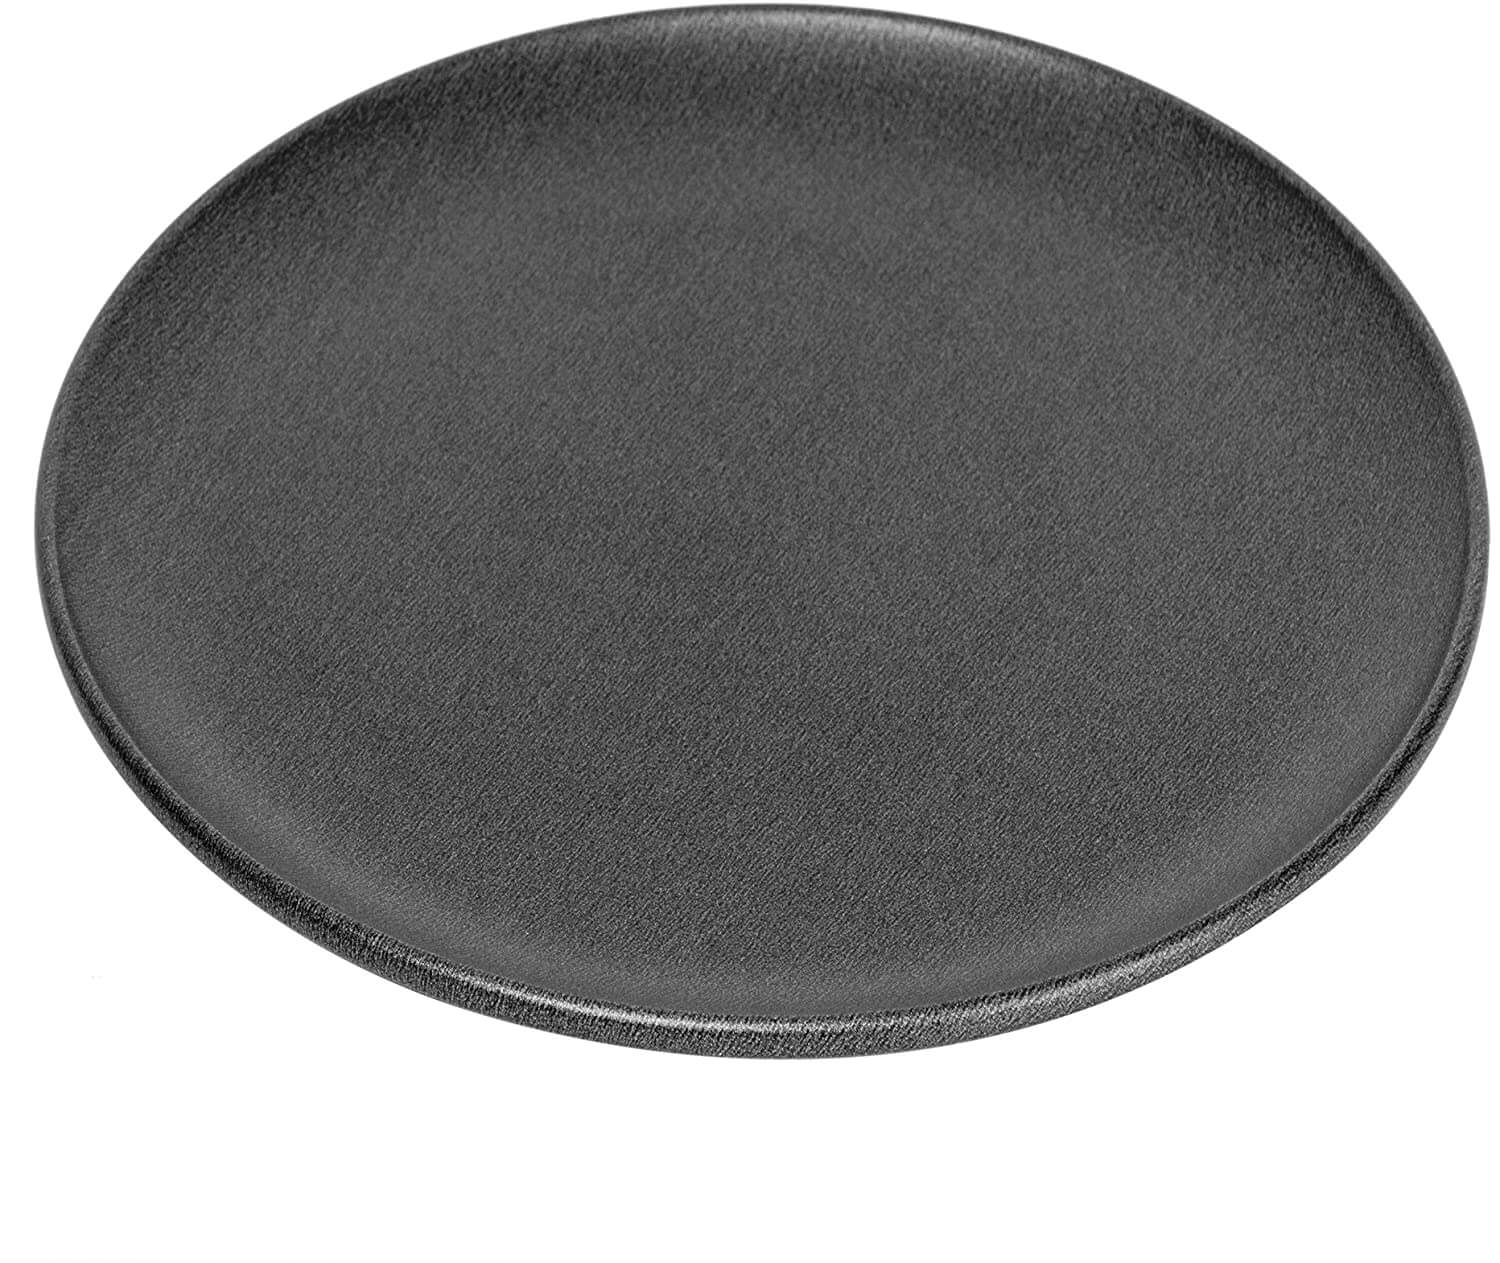 G&S Metal Products Company Pizza Pan